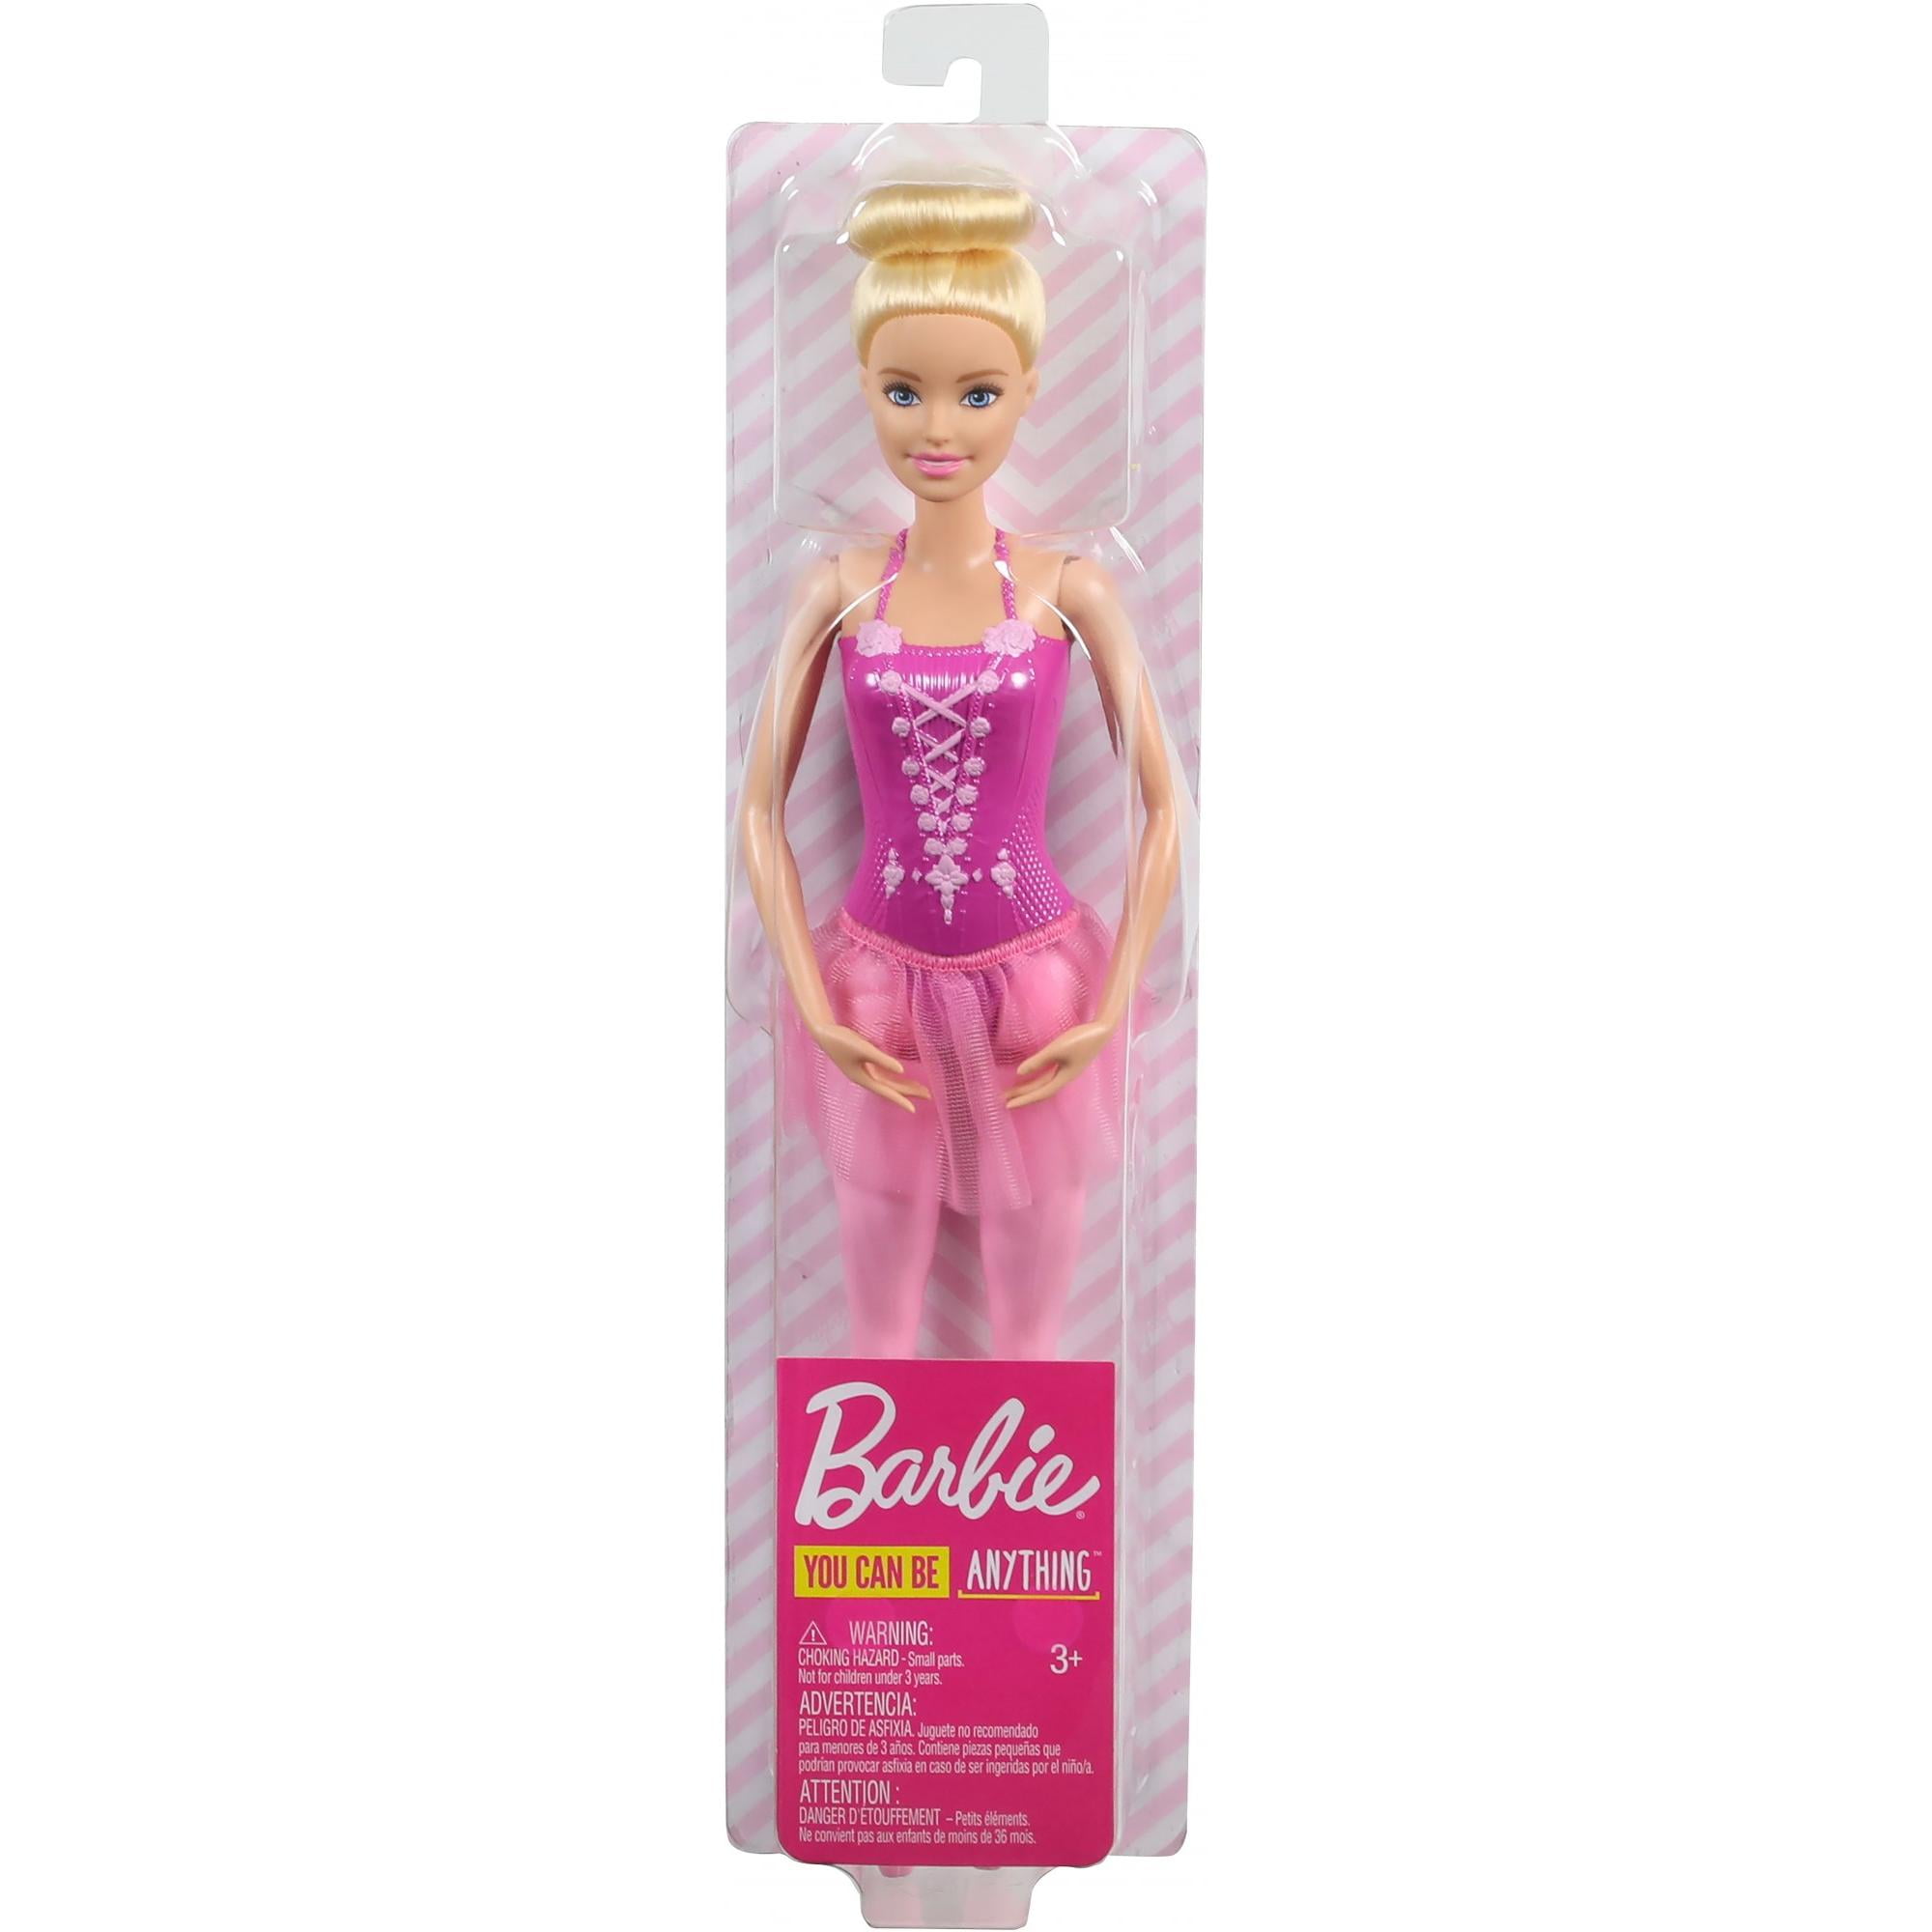 Barbie Career Ballerina Doll with Tutu and Sculpted Toe Shoes